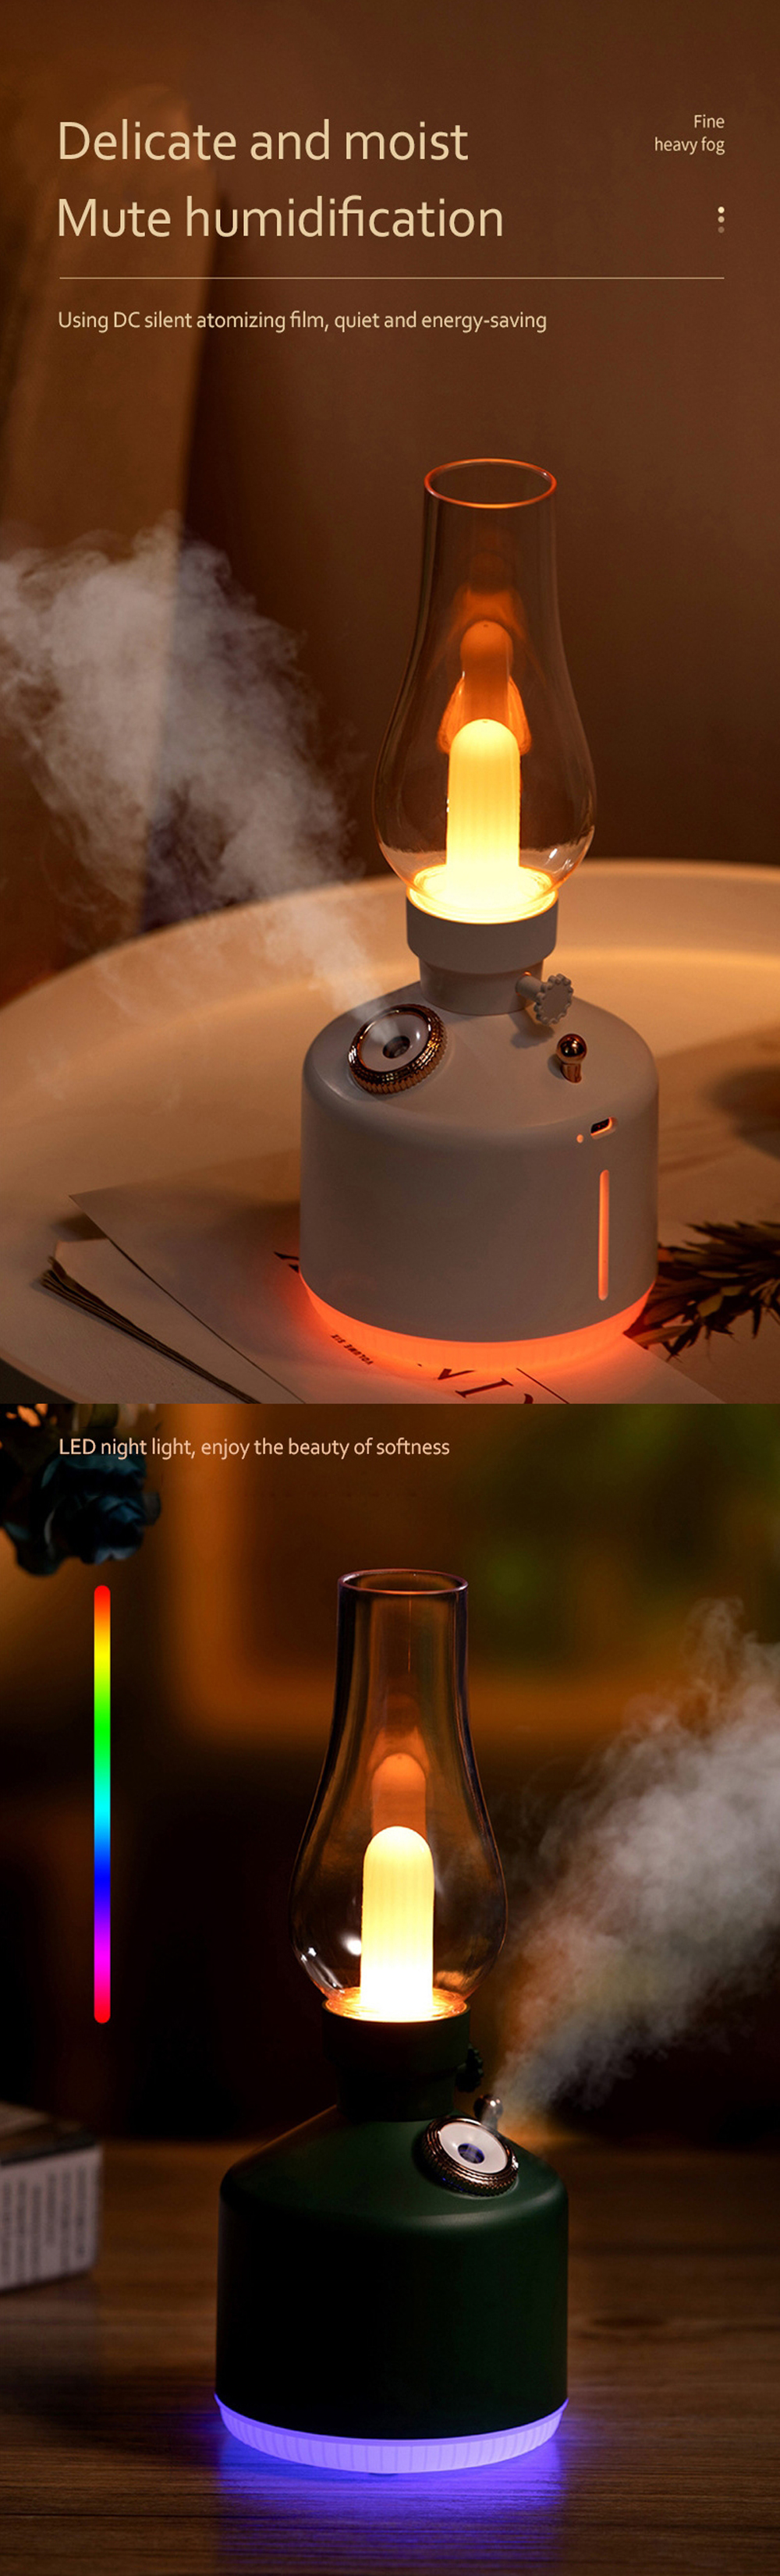 IPReereg-Colorful-Camping-Lights-2-Mode-Wireless-Humidifier-Portable-Retro-LED-Lights-Outdoor-Tent-L-1917723-2